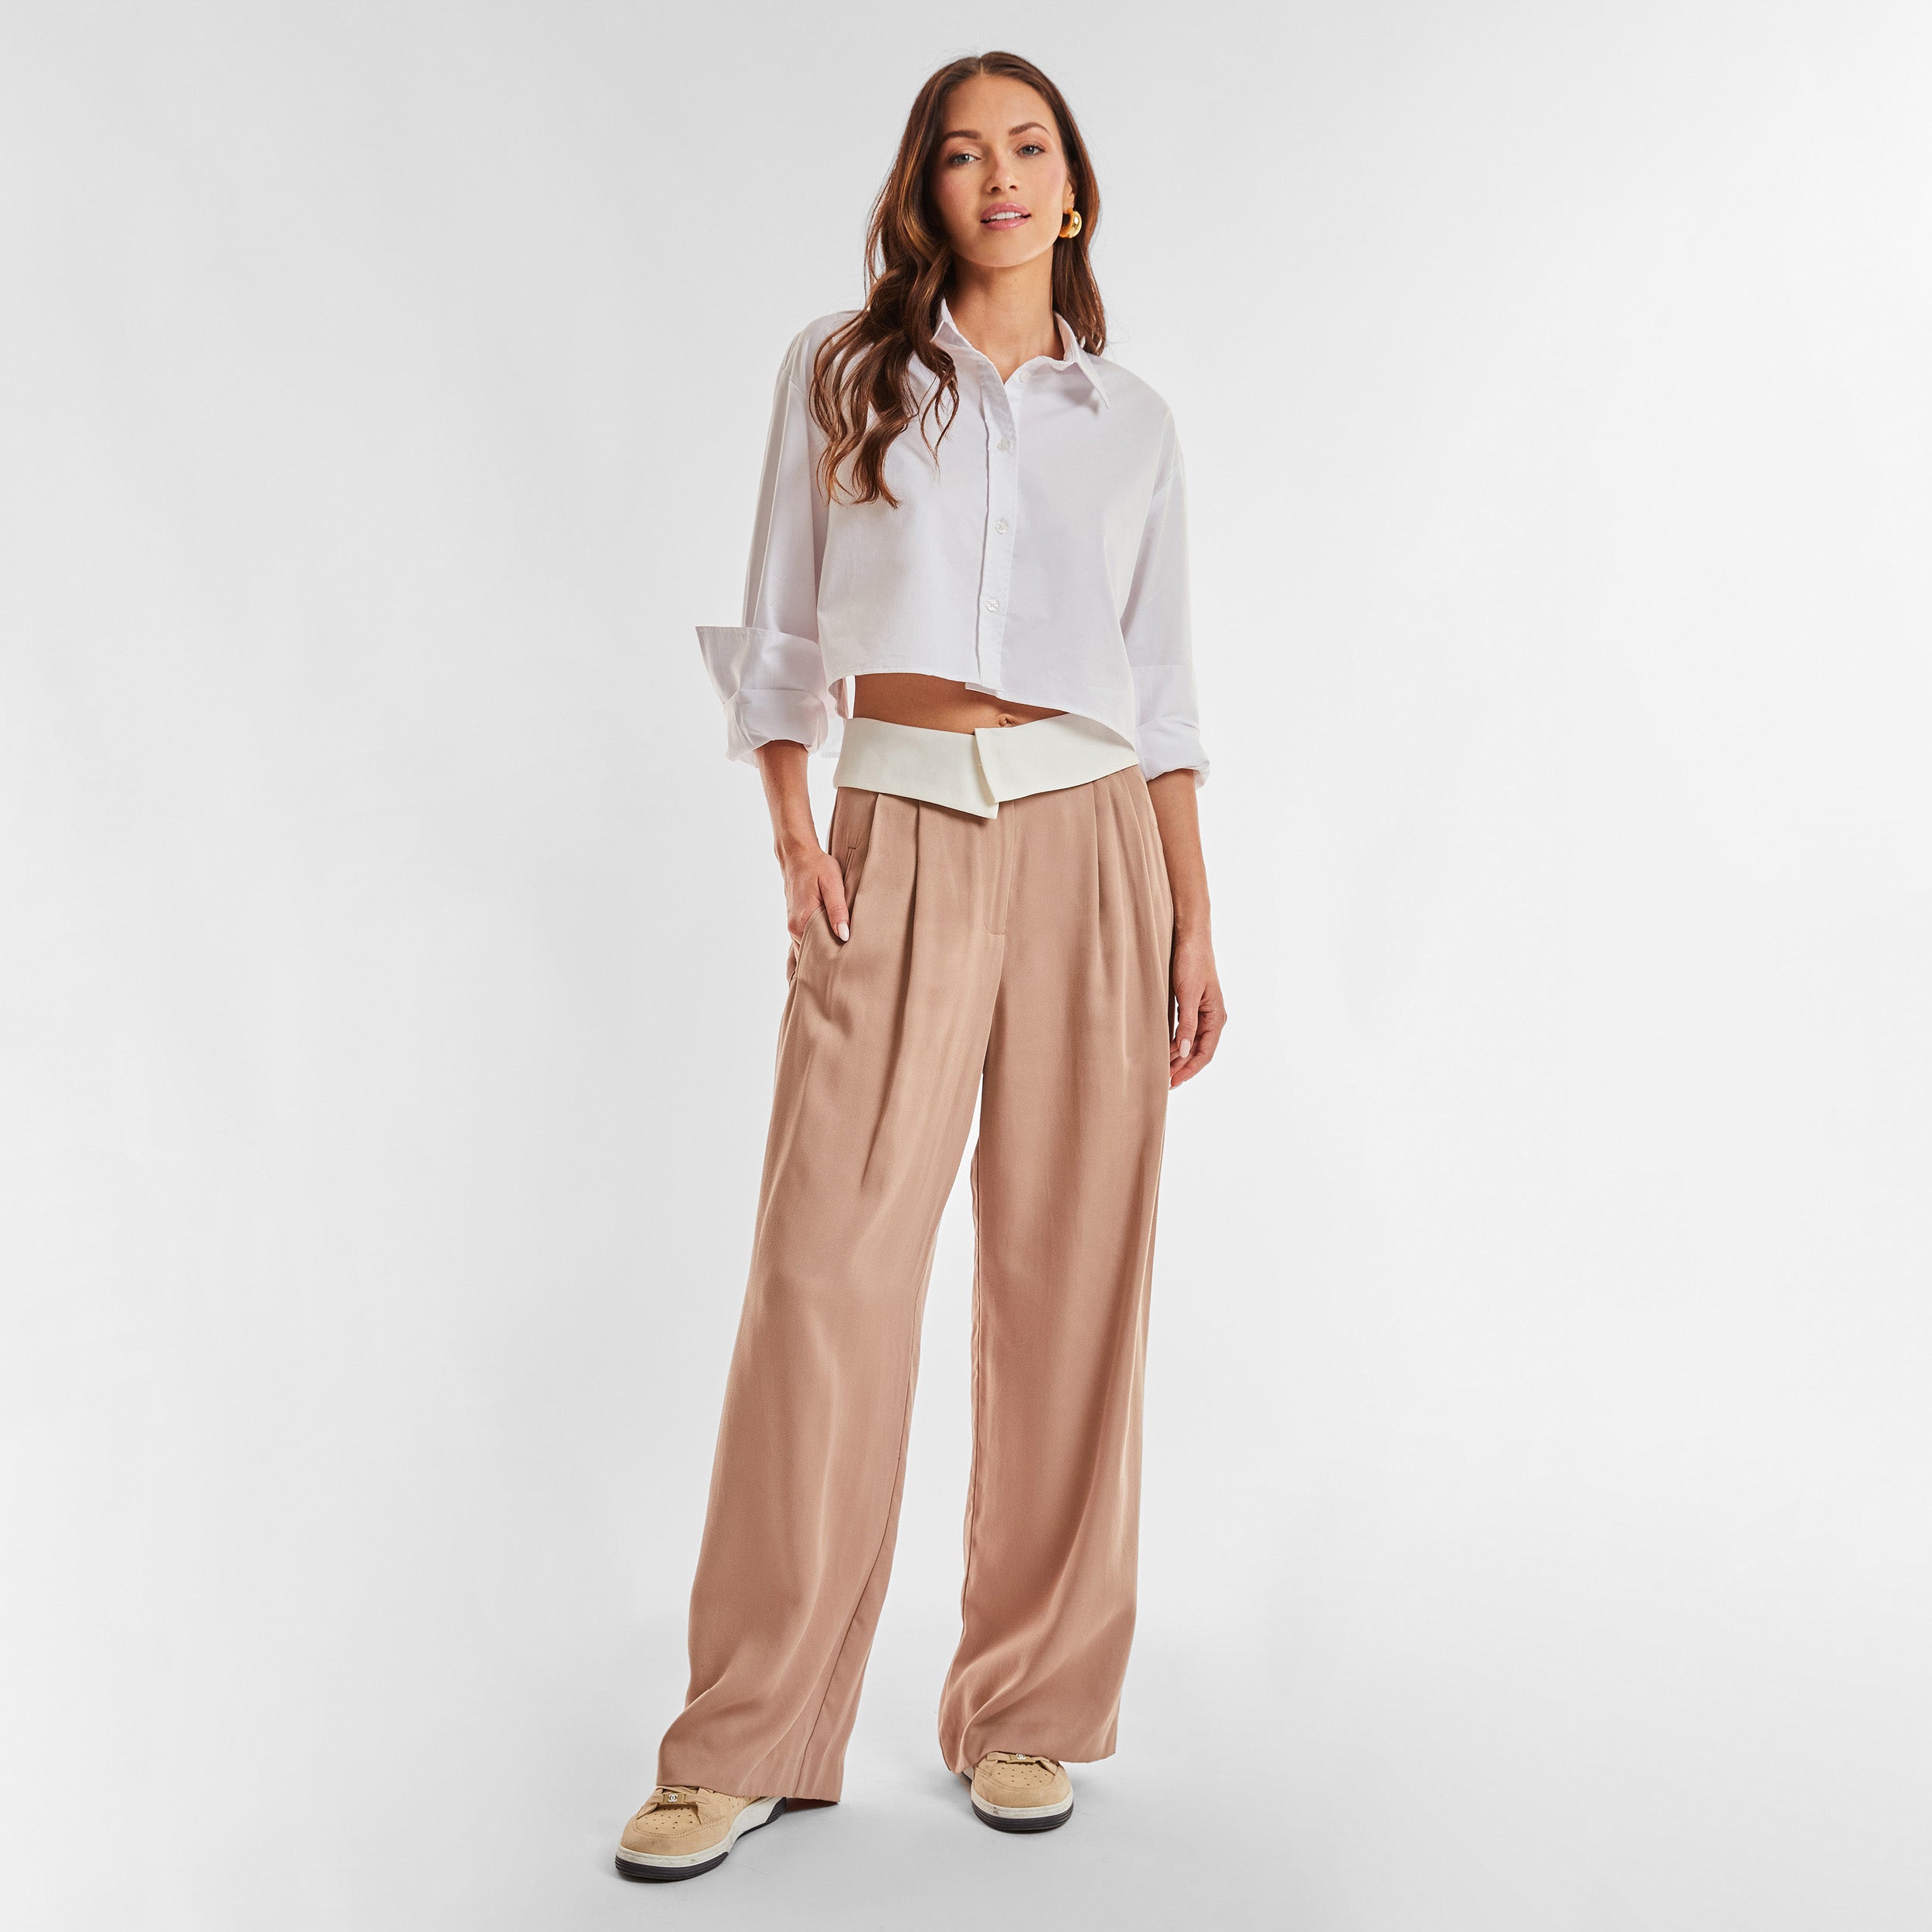 Full view of woman wearing light brown trousers with white foldover waistband detail.